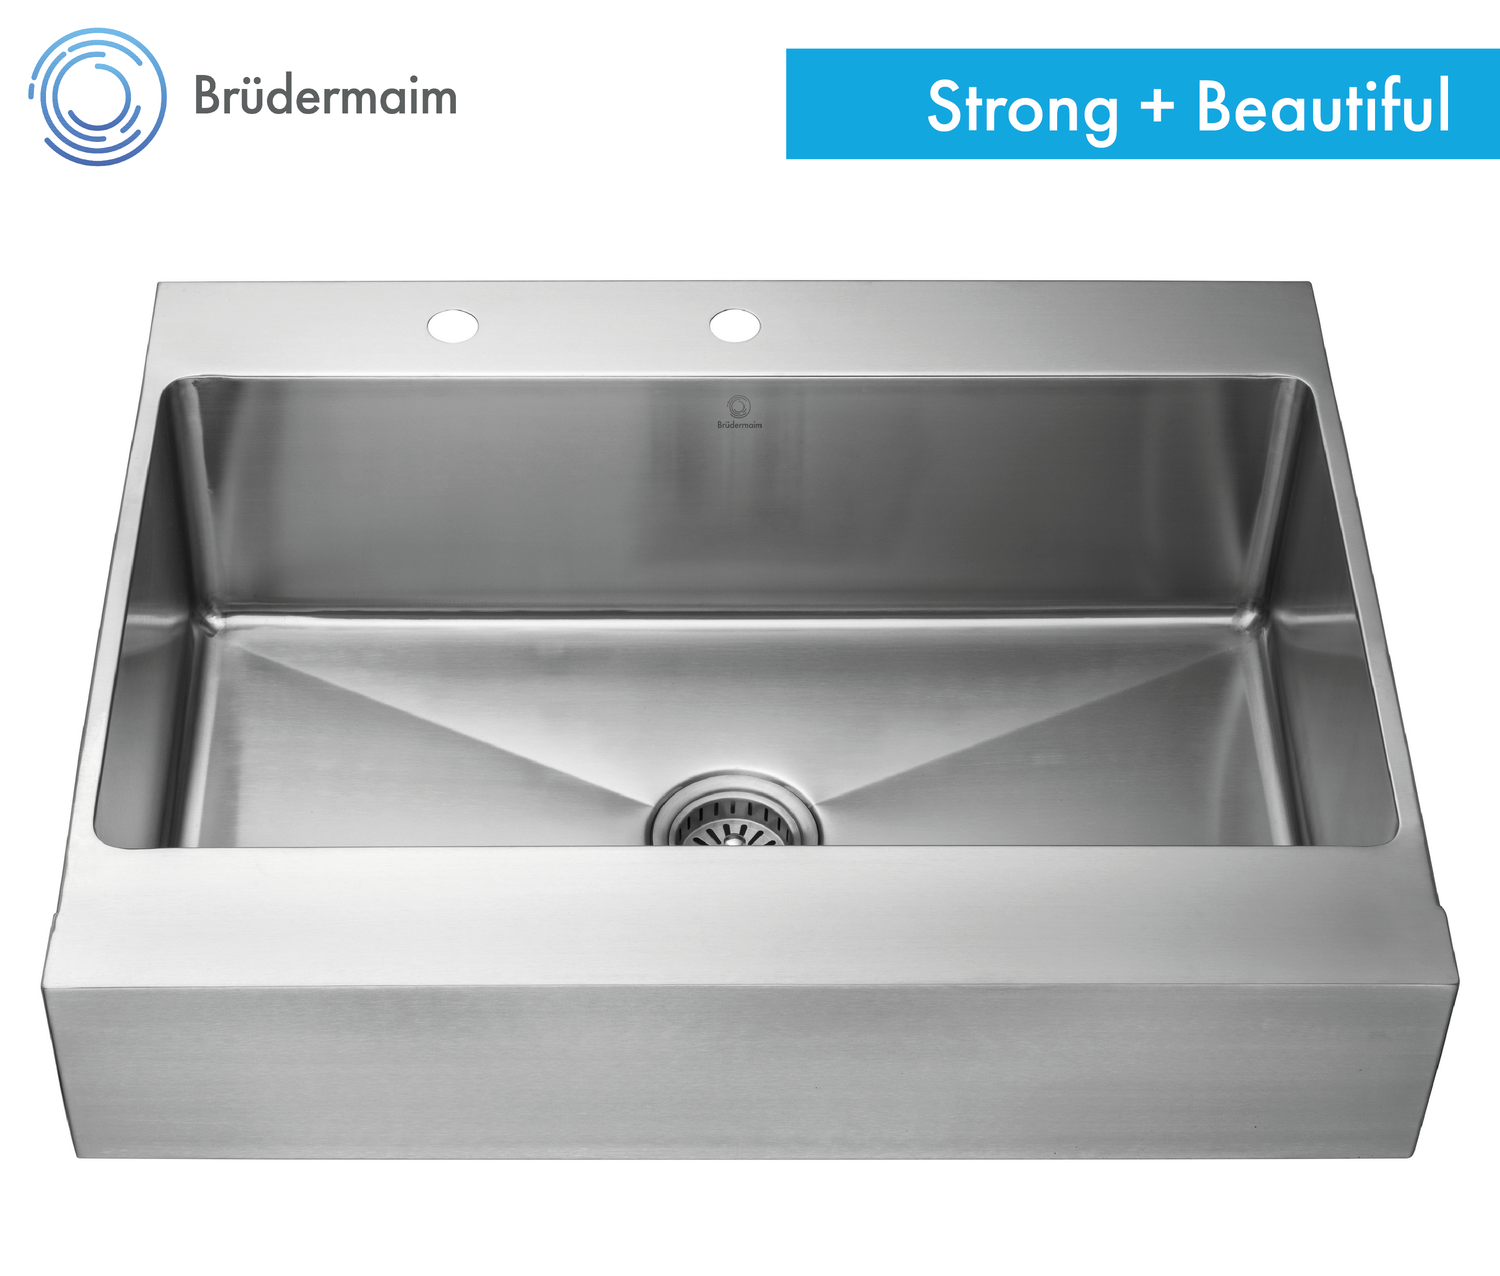 Strong and Beautiful Sink